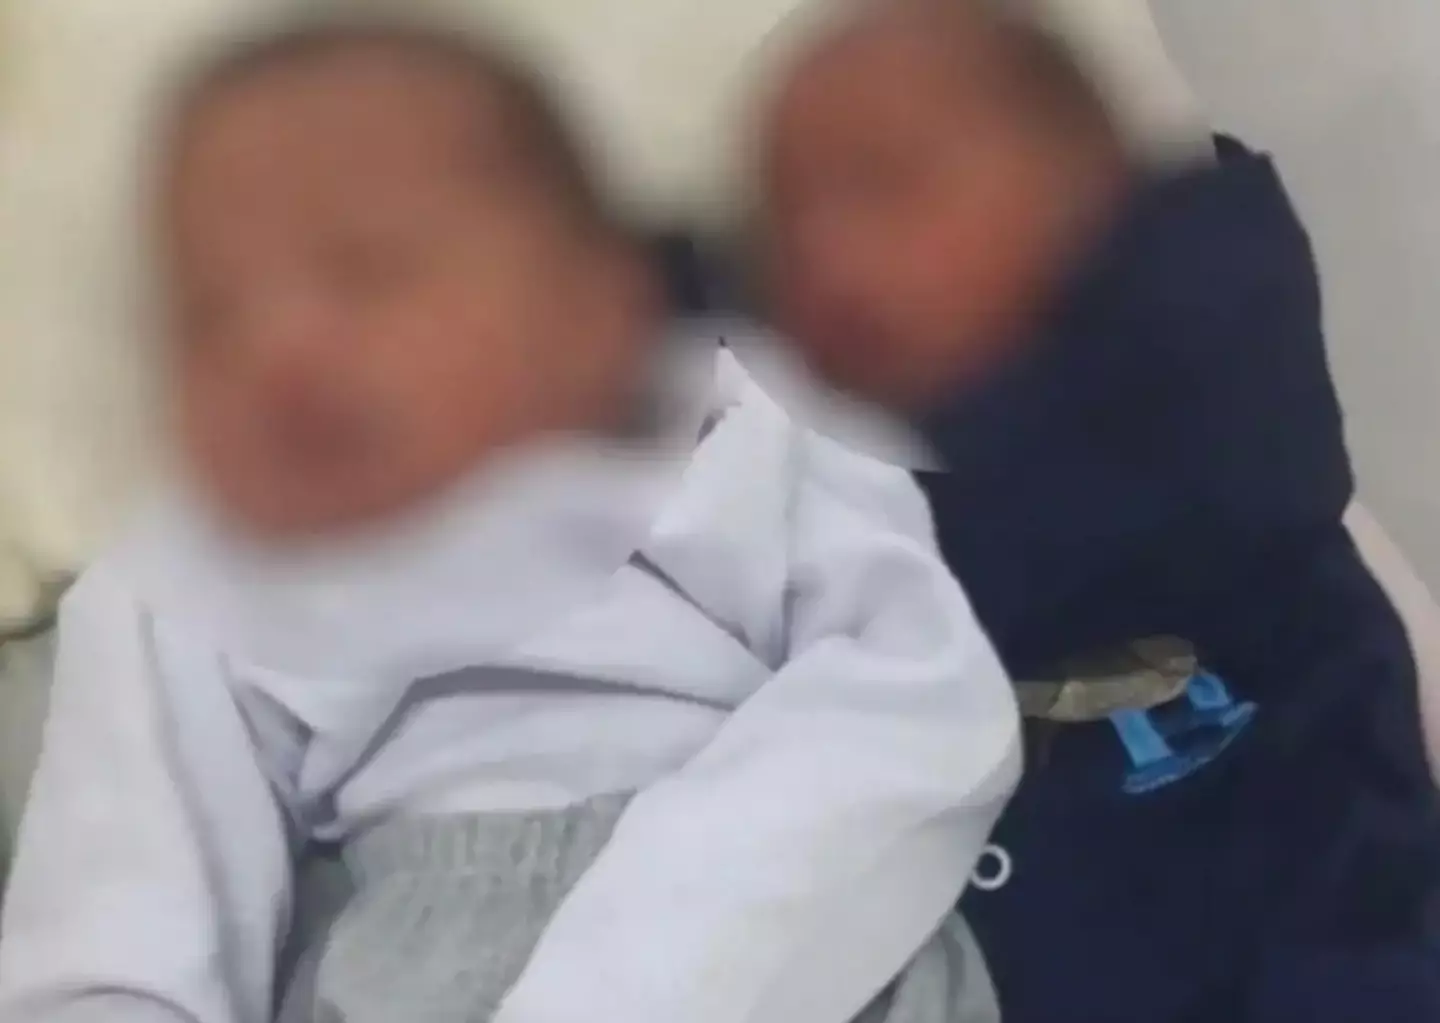 A Portuguese teenager has welcomed a set of twins with two different dads.